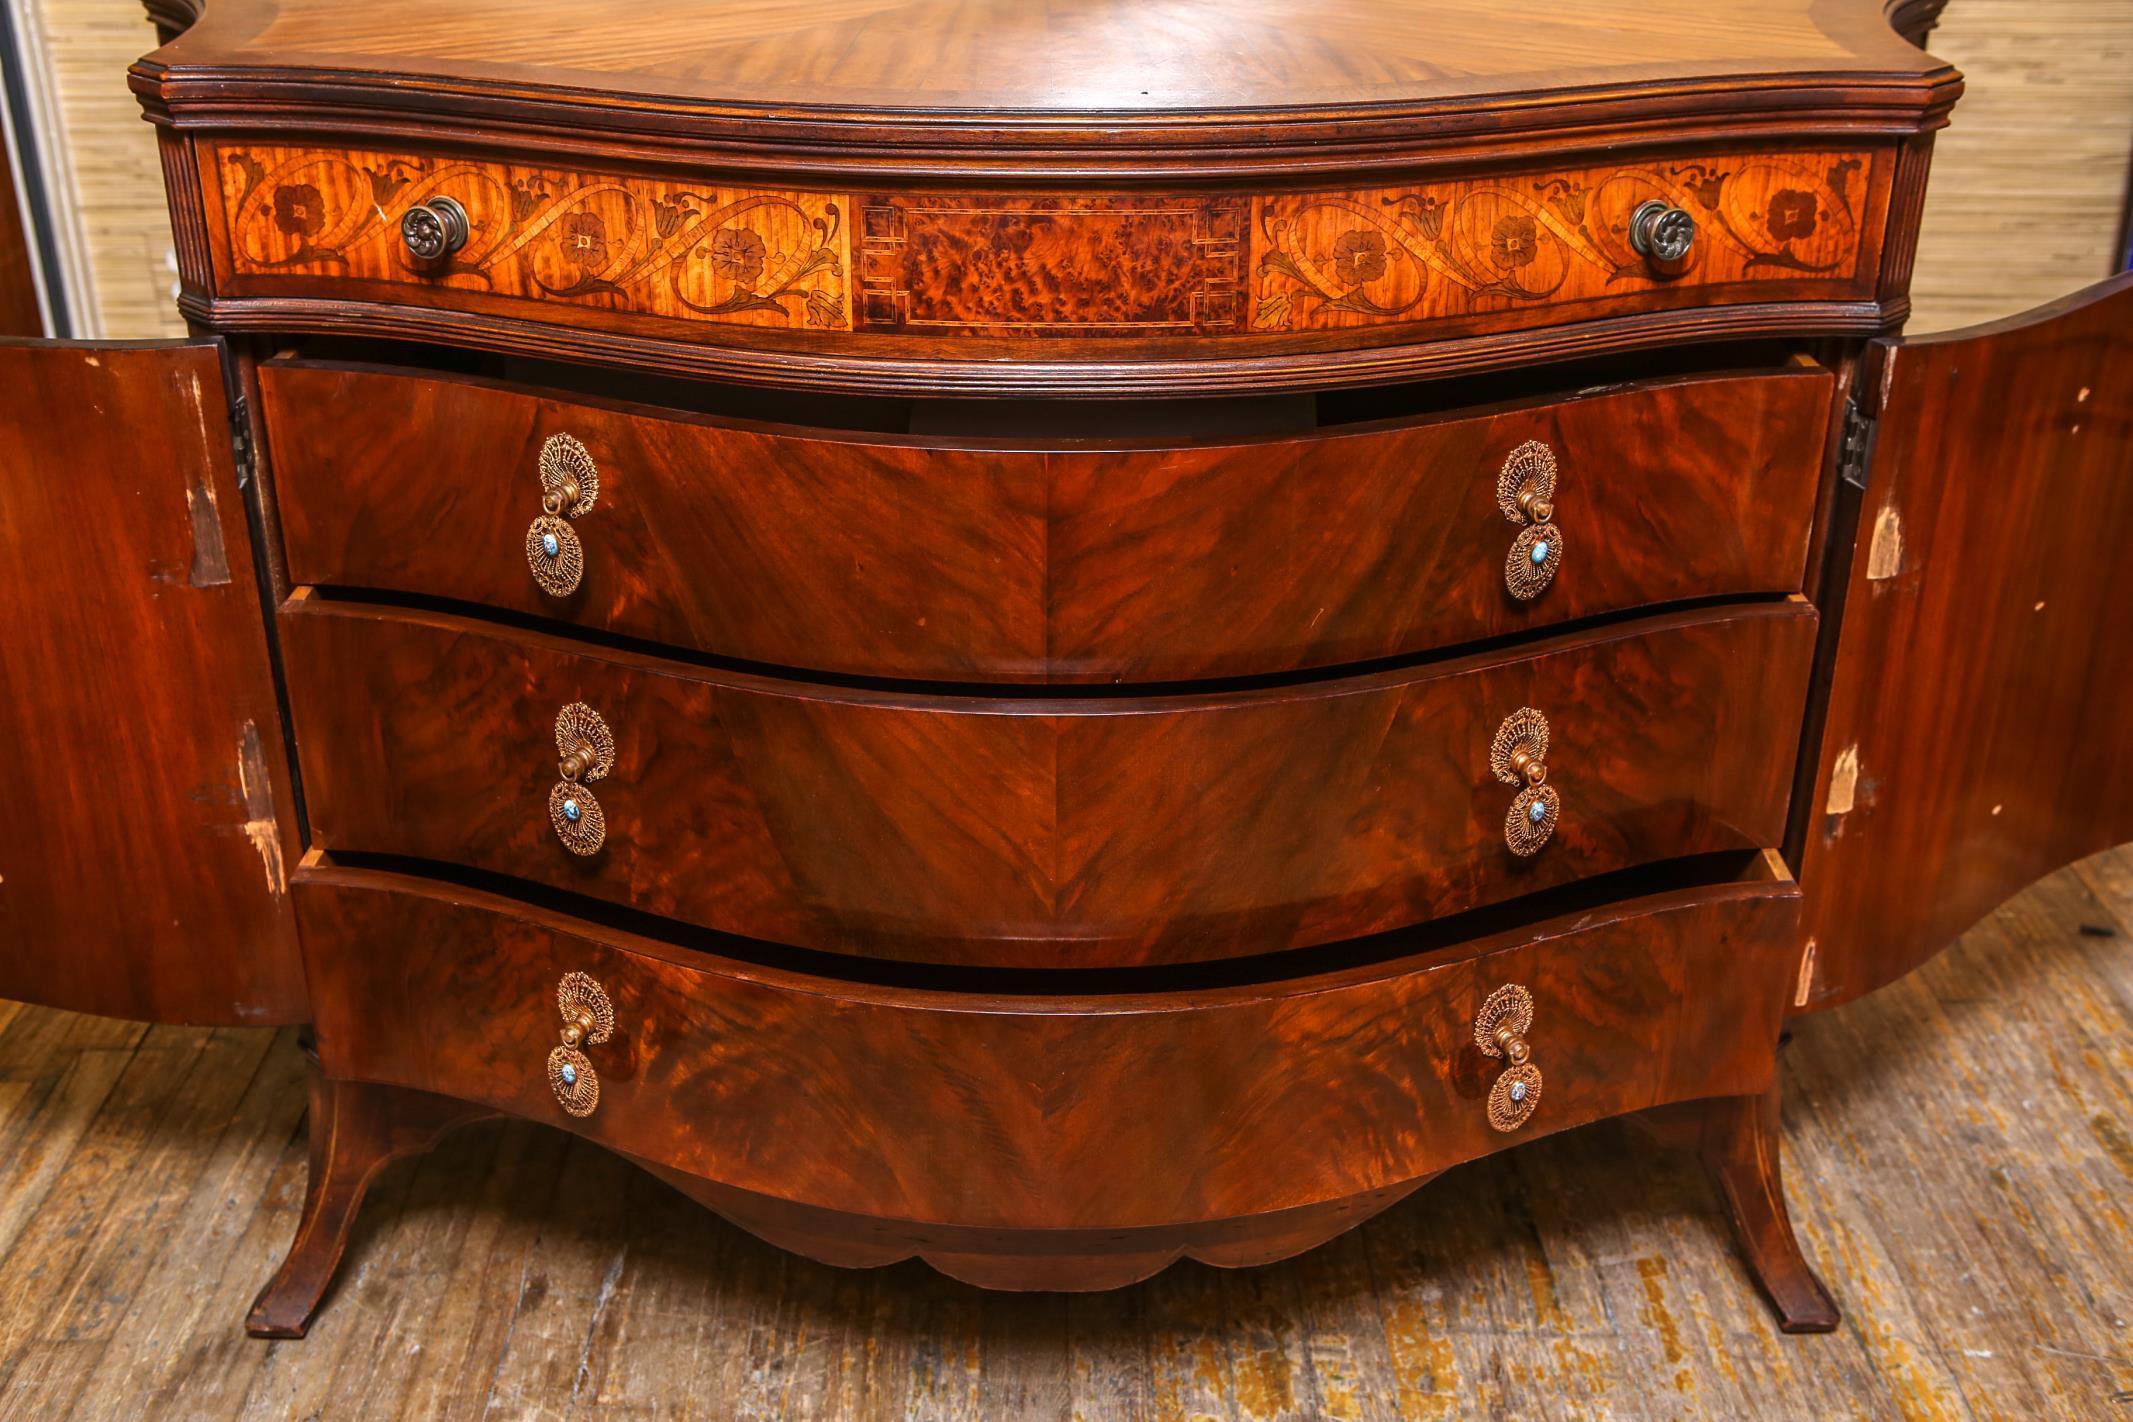 Italian Neoclassical Manner Marquetry Serpentine Commode in Mahogany & Fruitwood 1